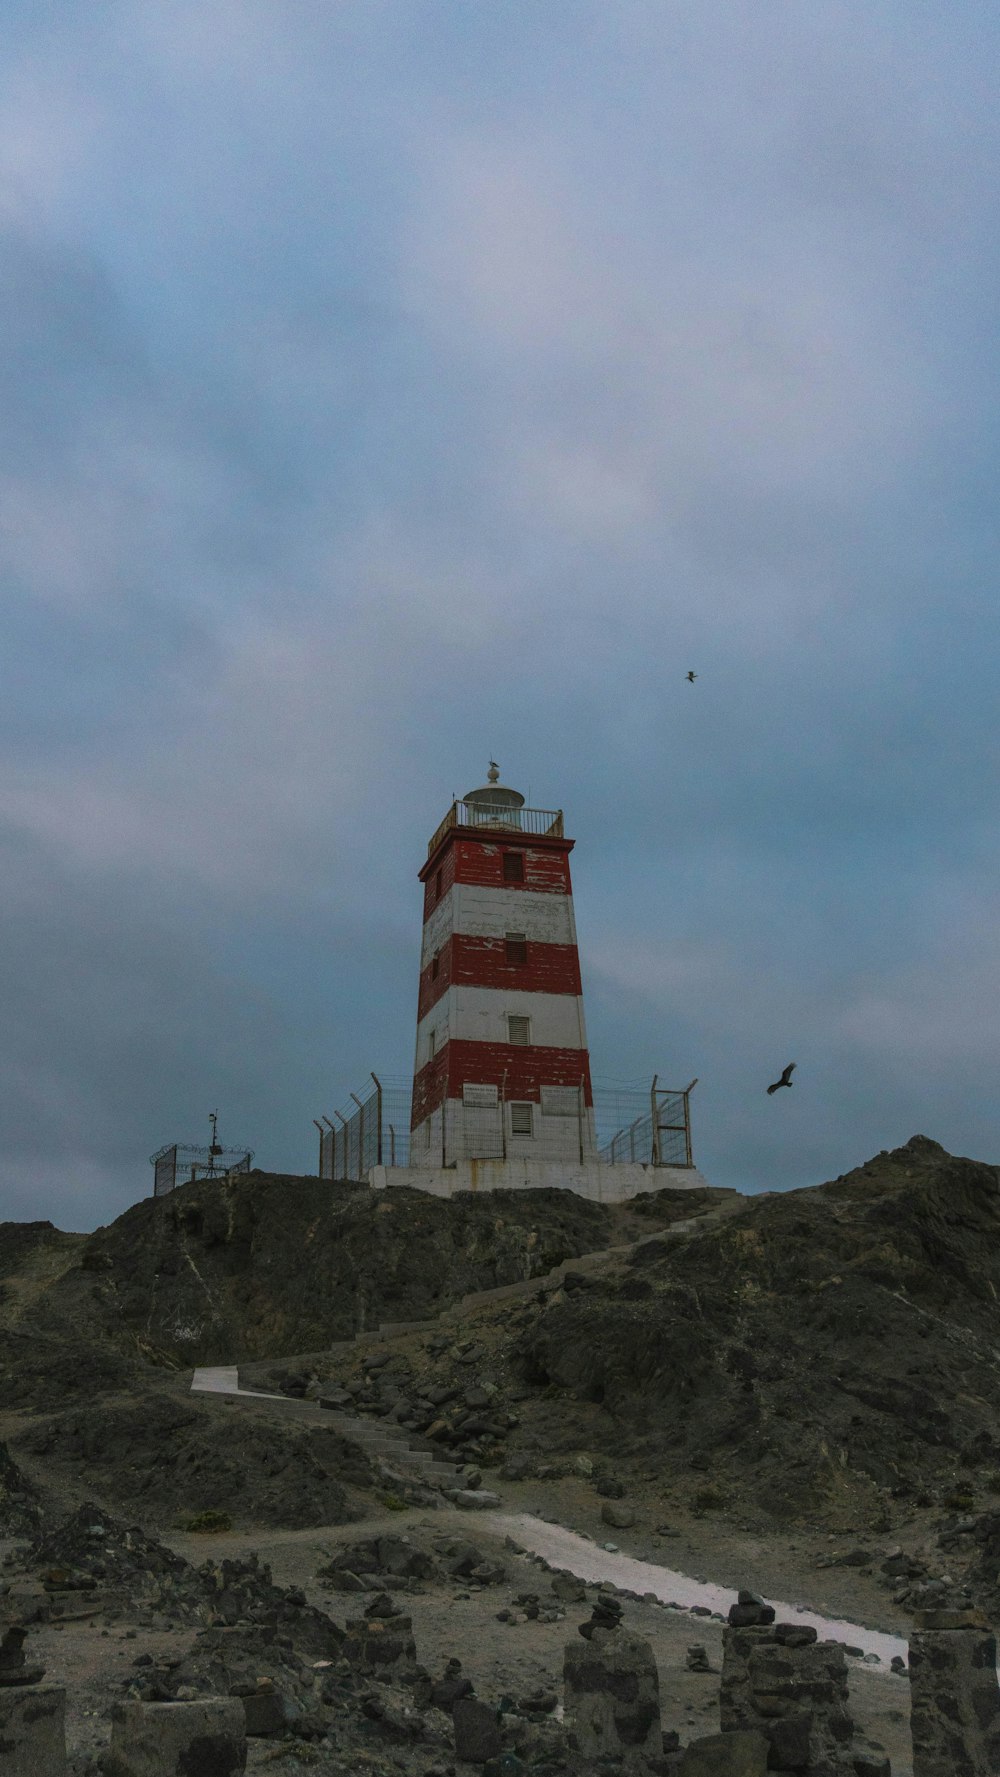 a red and white lighthouse on top of a hill